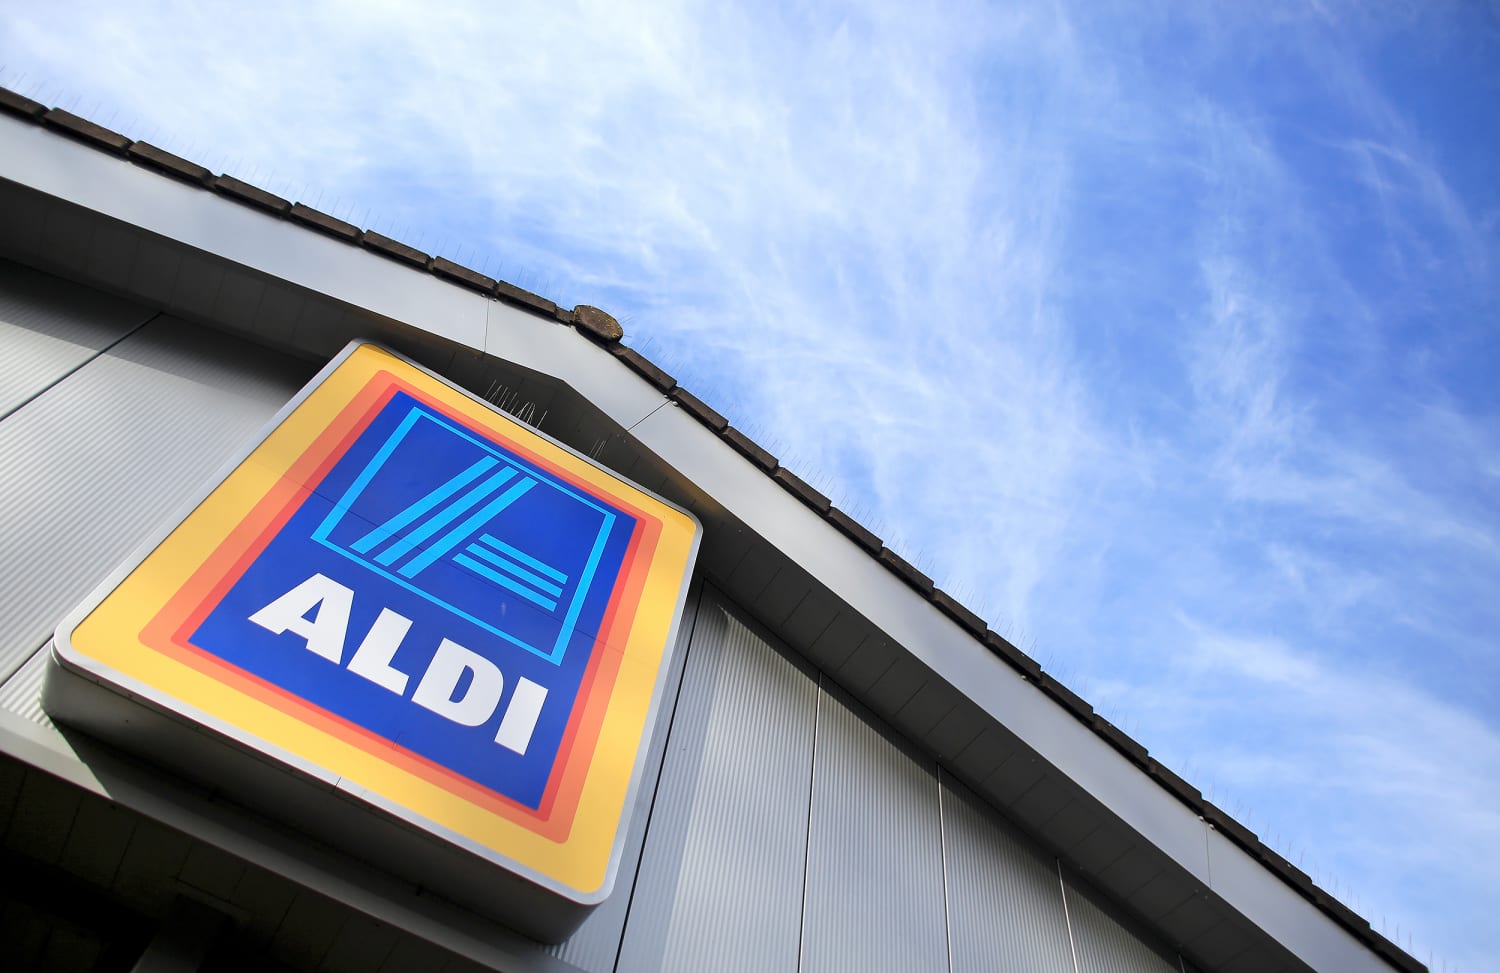 Aldi plans to open 800 new stores in the US